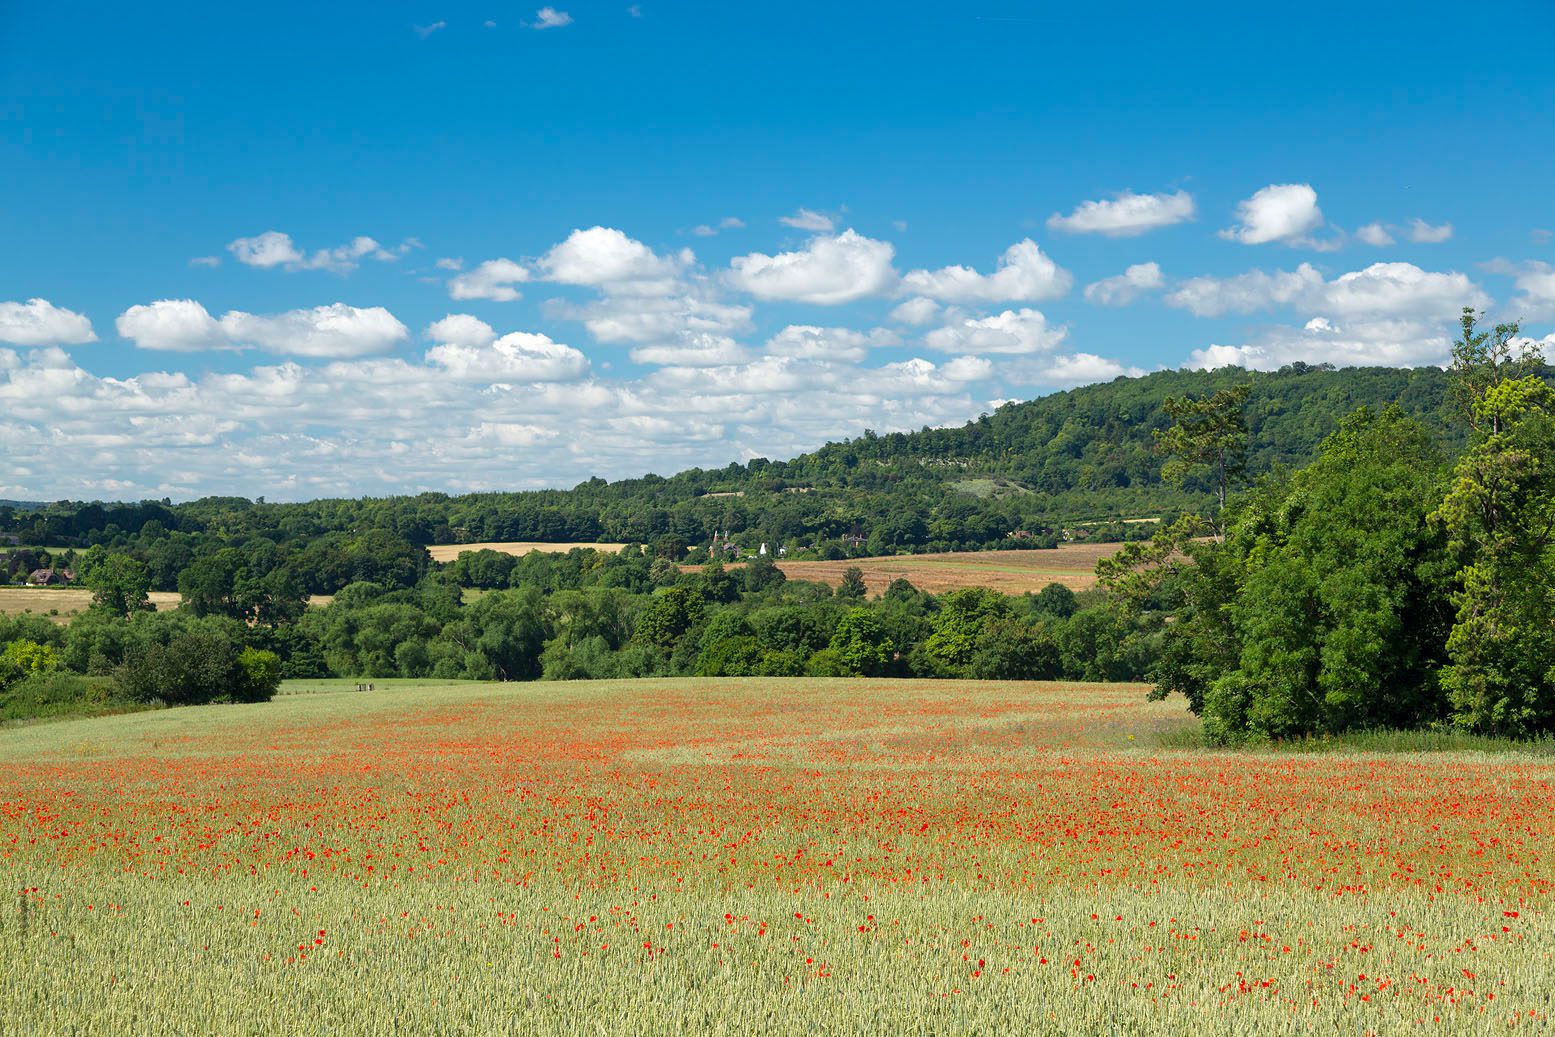 Poppy field with trees surrounding and in the distance.